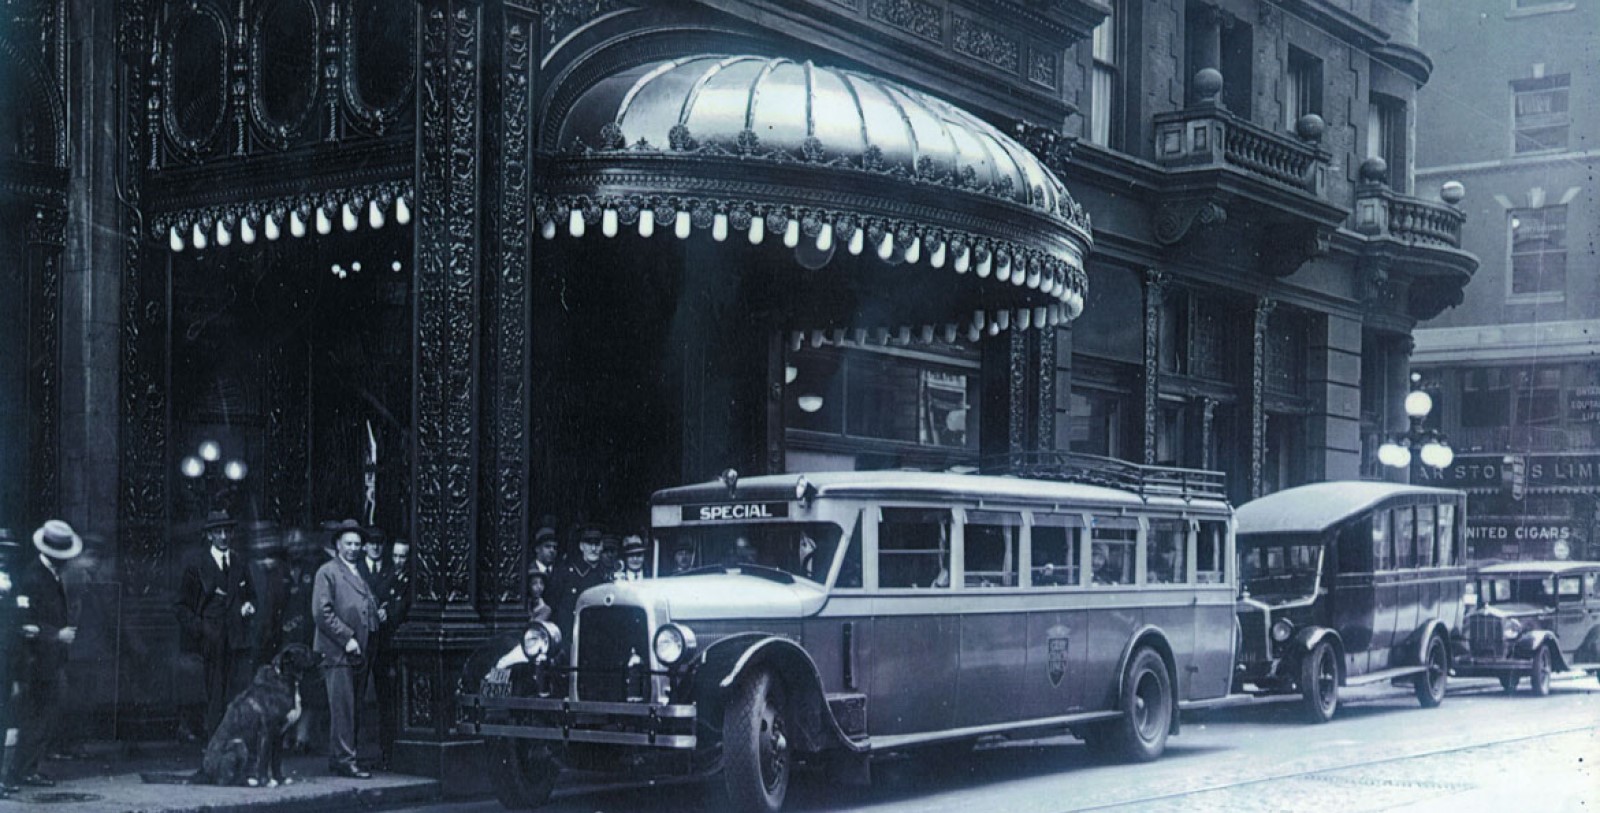 Image of Consort Bar, The Omni King Edward Hotel, 1903, Member of Historic Hotels Worldwide, in Toronto, Ontario, Canada, History